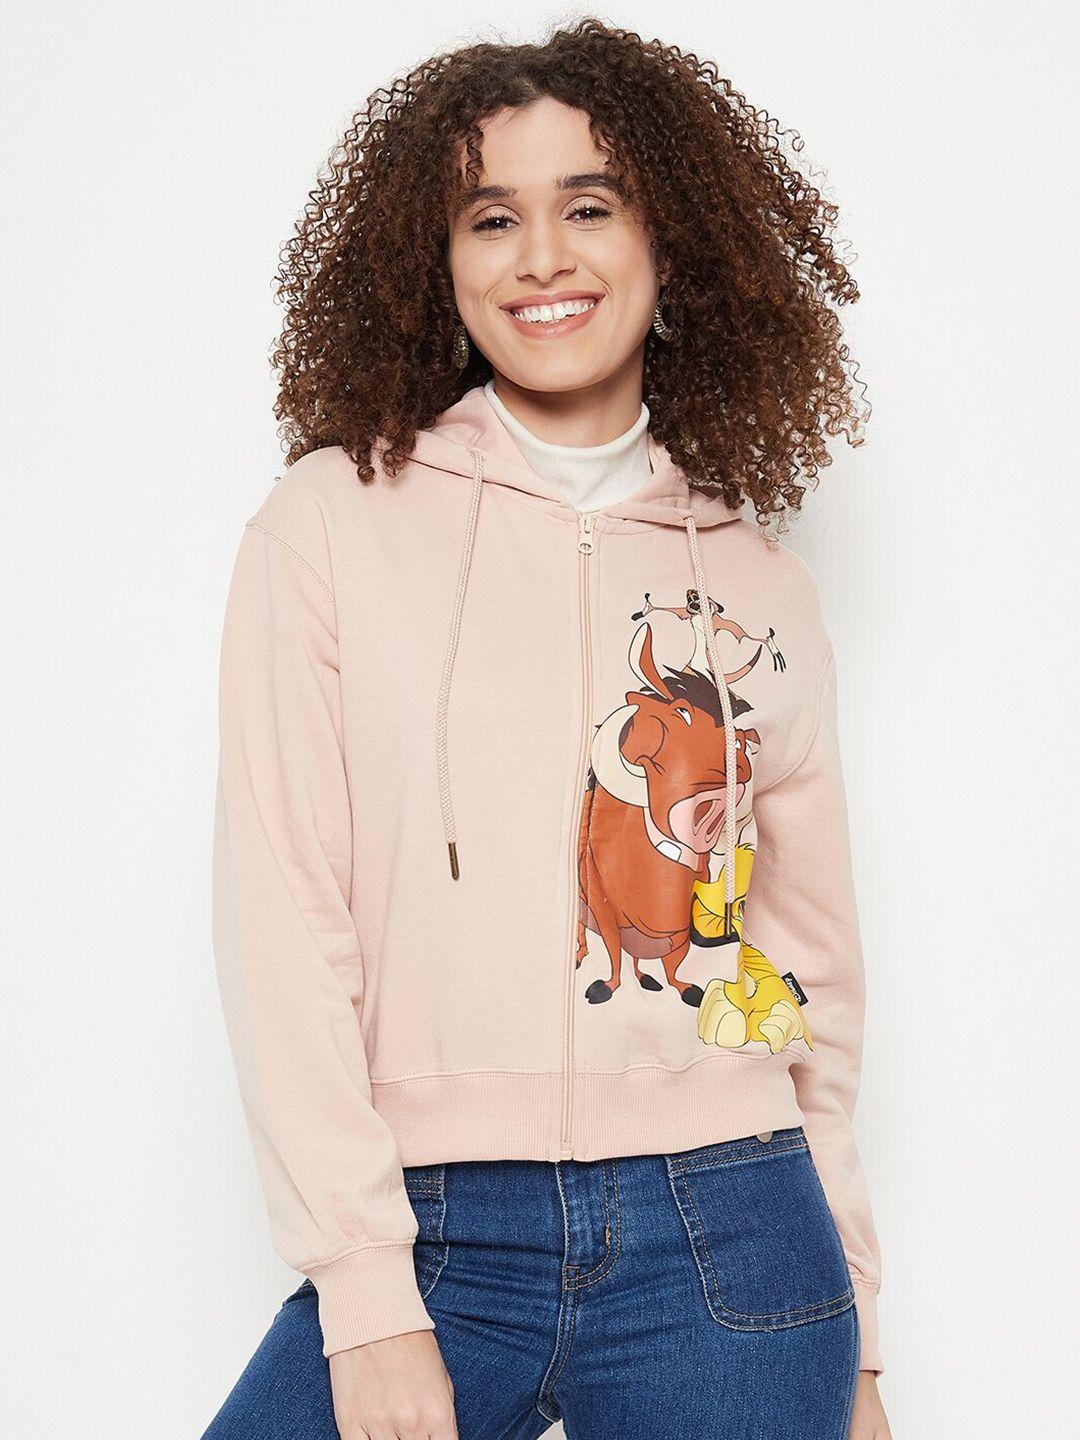 Madame Lion King Printed Hooded Cotton Front-Open Sweatshirts